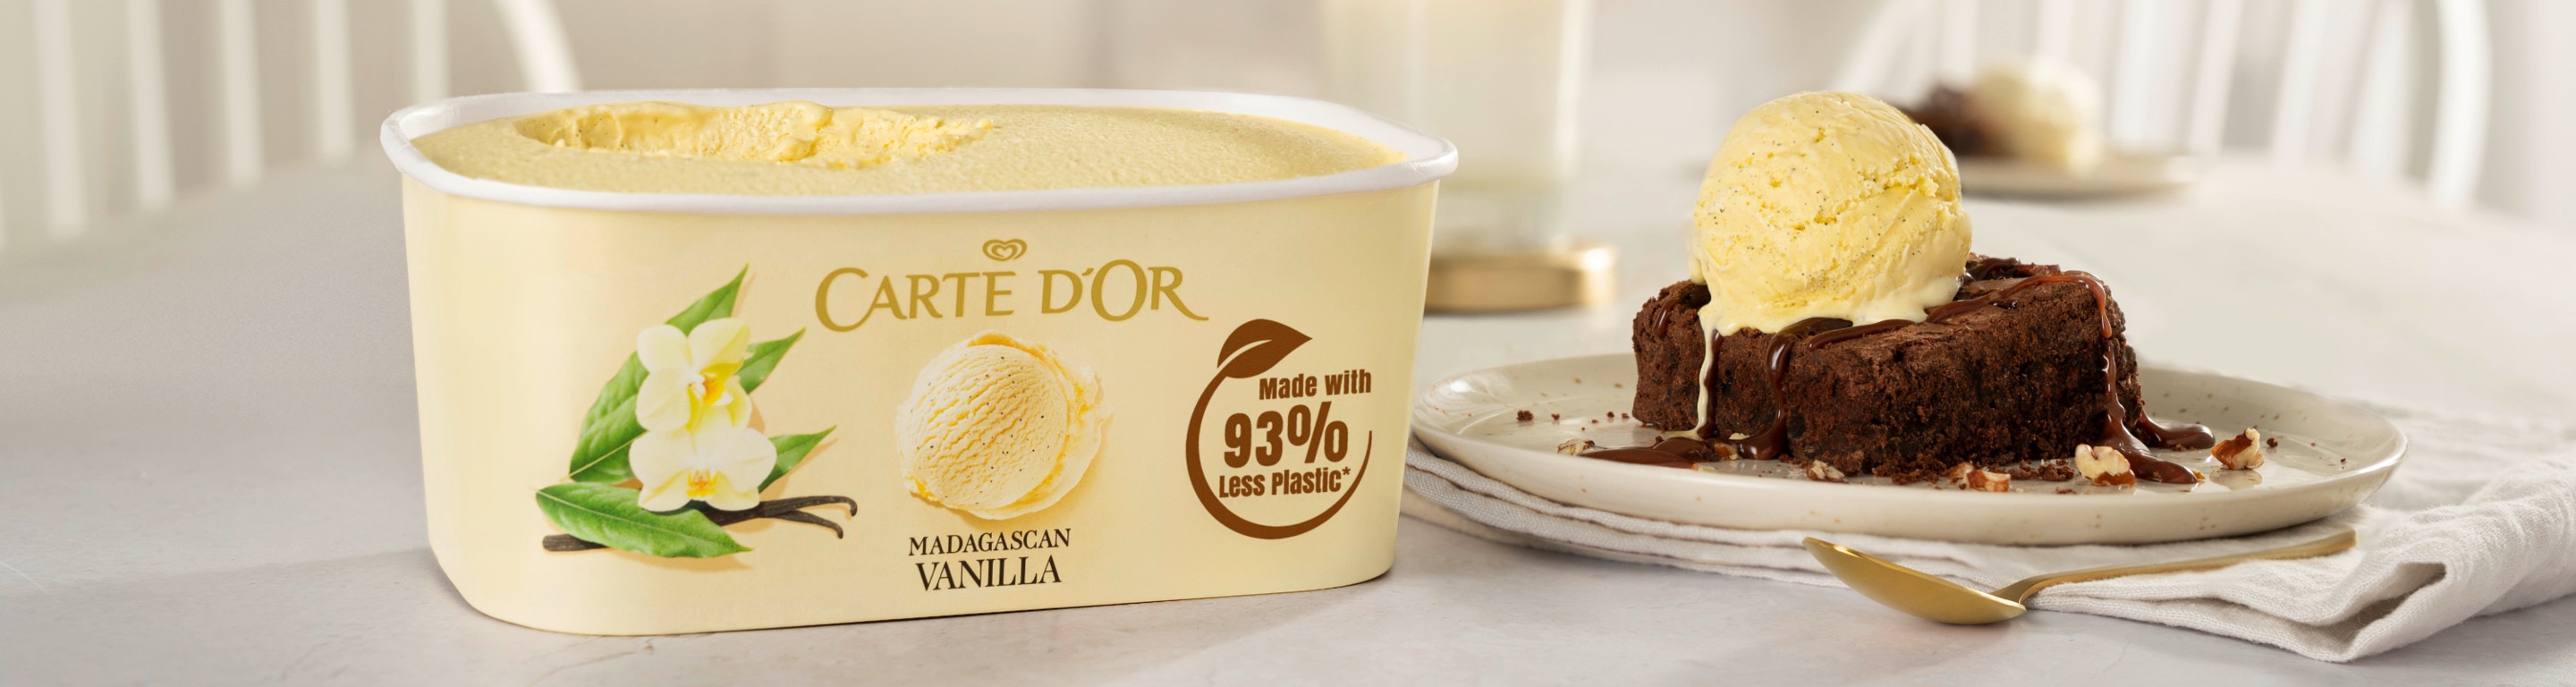 Carte d'or vanilla scoop ice cream  on a browny